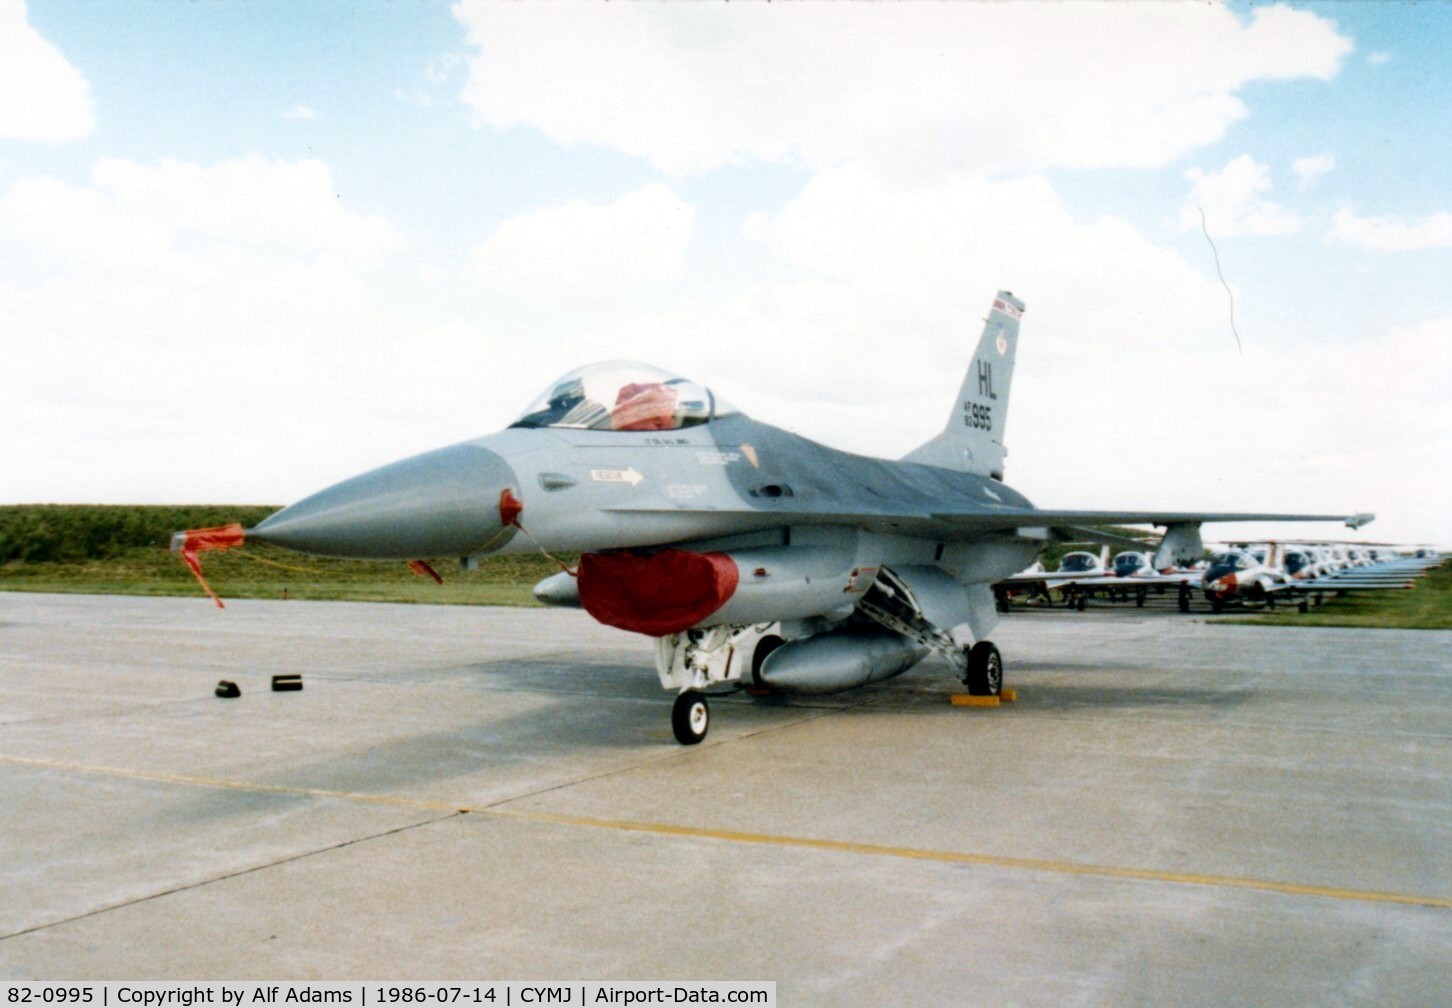 82-0995, 1982 General Dynamics F-16A Fighting Falcon C/N 61-588, At the airshow at Canadian Forces Base Moose Jaw, Saskatchewan in July 1986.